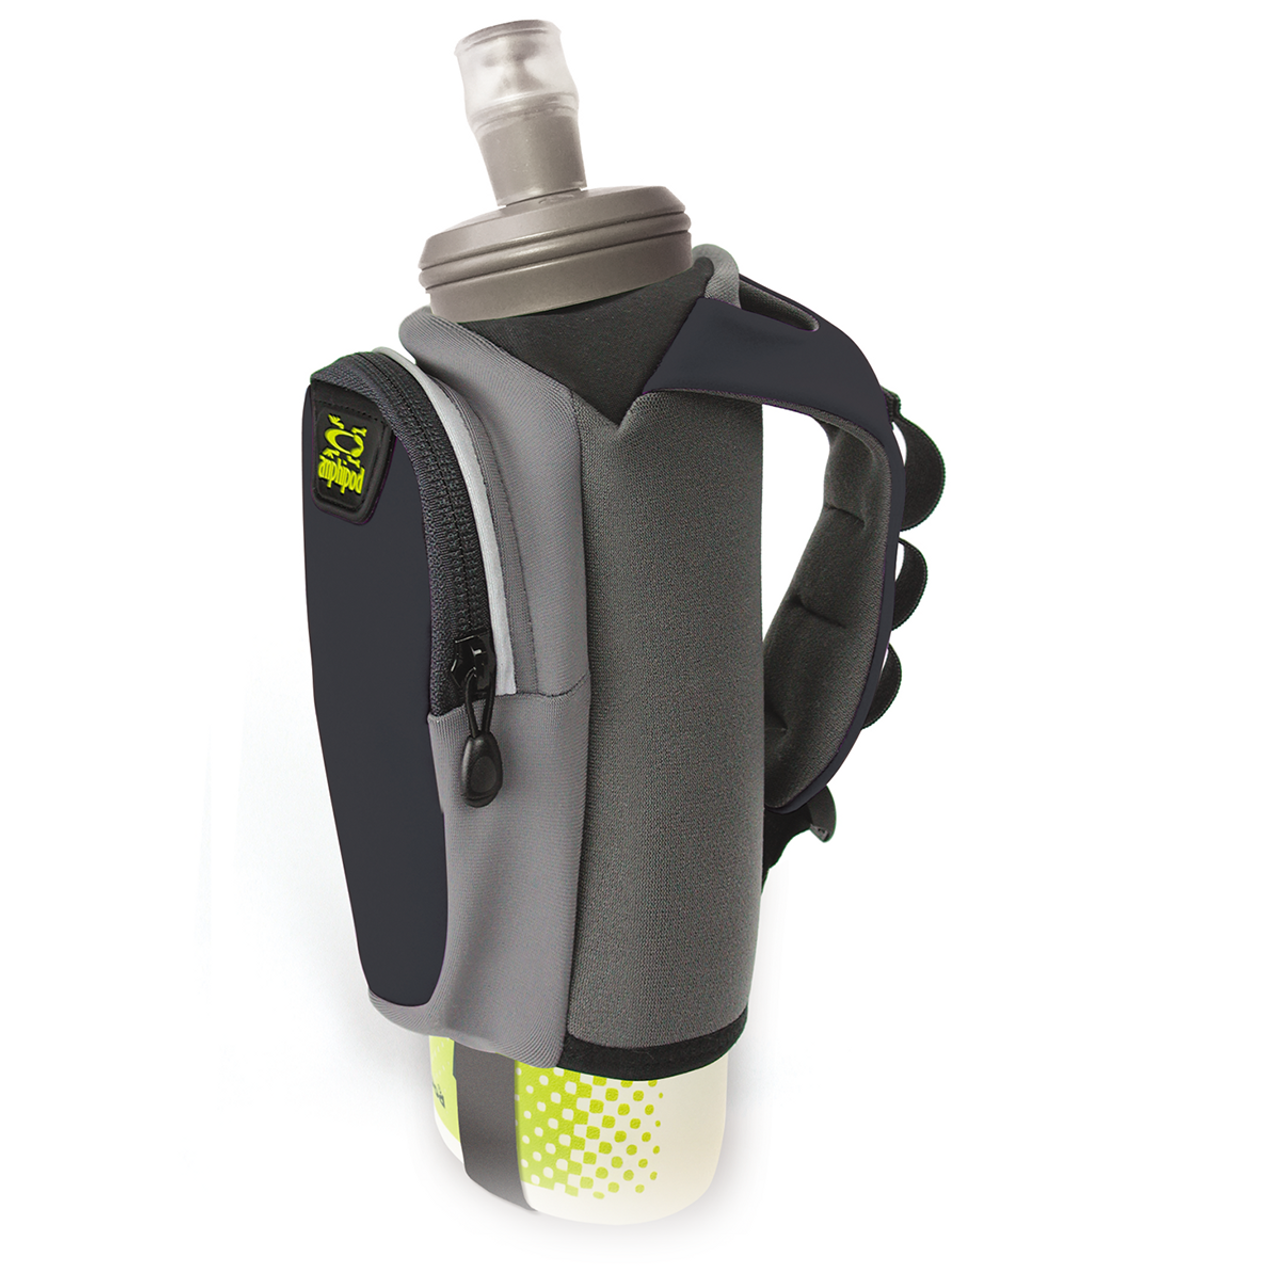 Wholesale rechargeable water bottle to Store, Carry and Keep Water Handy 